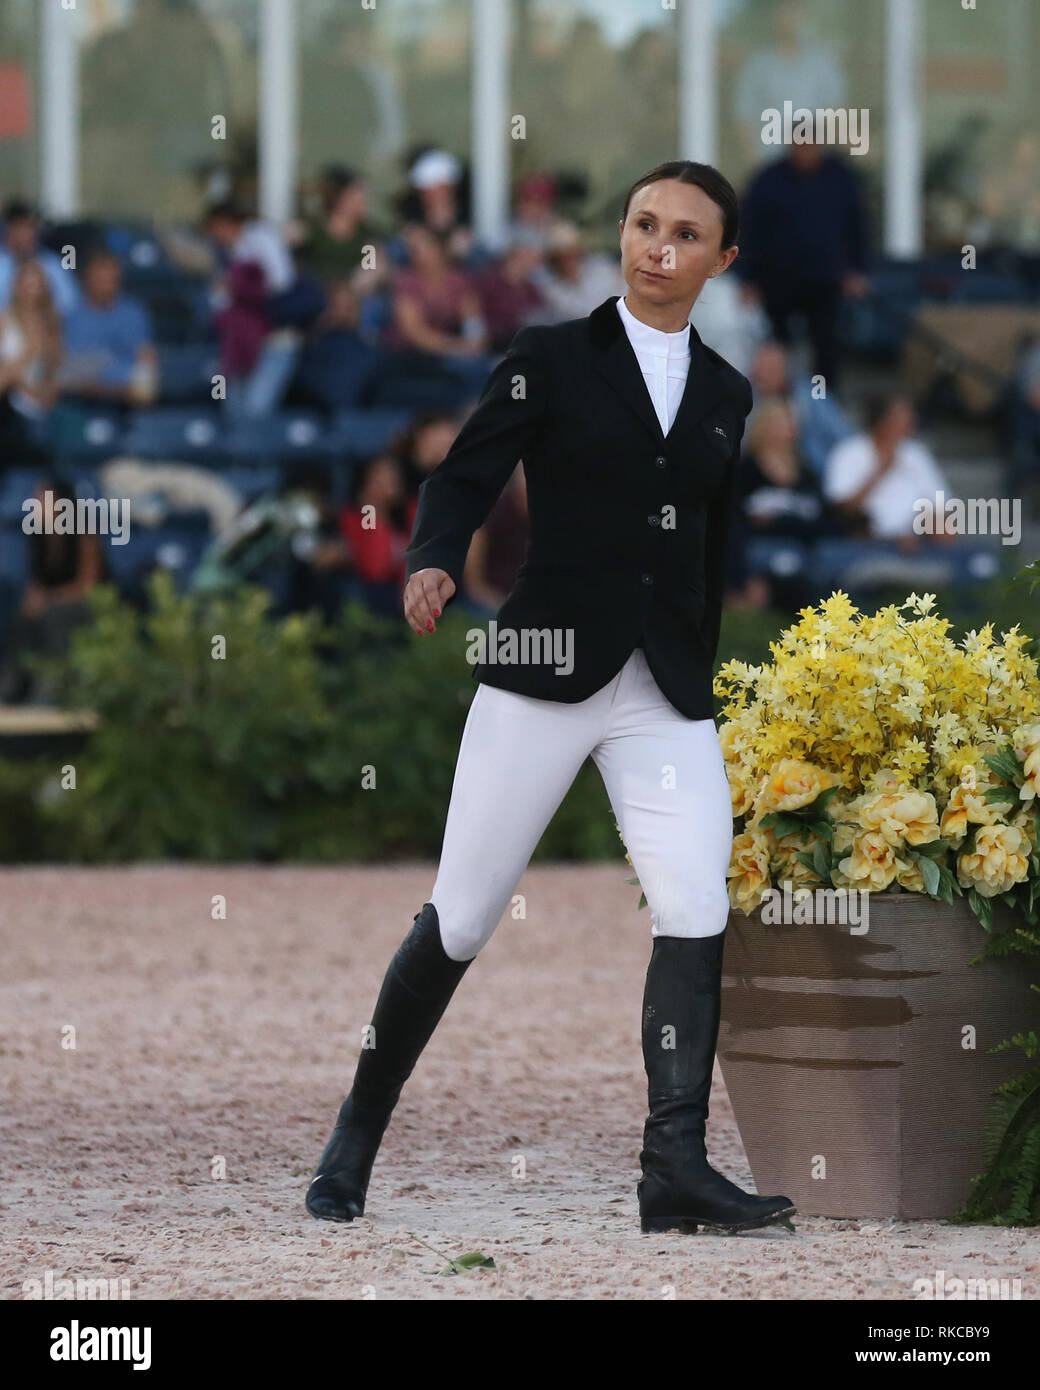 WELLINGTION, FL - FEBRUARY 09: SATURDAY NIGHT LIGHTS: Georgina Bloomberg participates in Class 101 - FEI CSI5* $391,000 Fidelity Investments Grand Prix where the winner was Martin Fuchs (Swiss) second place was Kent Farrington (USA) and third was Conor Swail (IRE). The Winter Equestrian Festival (WEF) is the largest, longest running hunter/jumper equestrian event in the world held at the Palm Beach International Equestrian Center. Georgina Leigh Bloomberg is the owner of the equestrian team New York Empire; a professional equestrian; and a philanthropist. She is the daughter of Susan Brown an Stock Photo